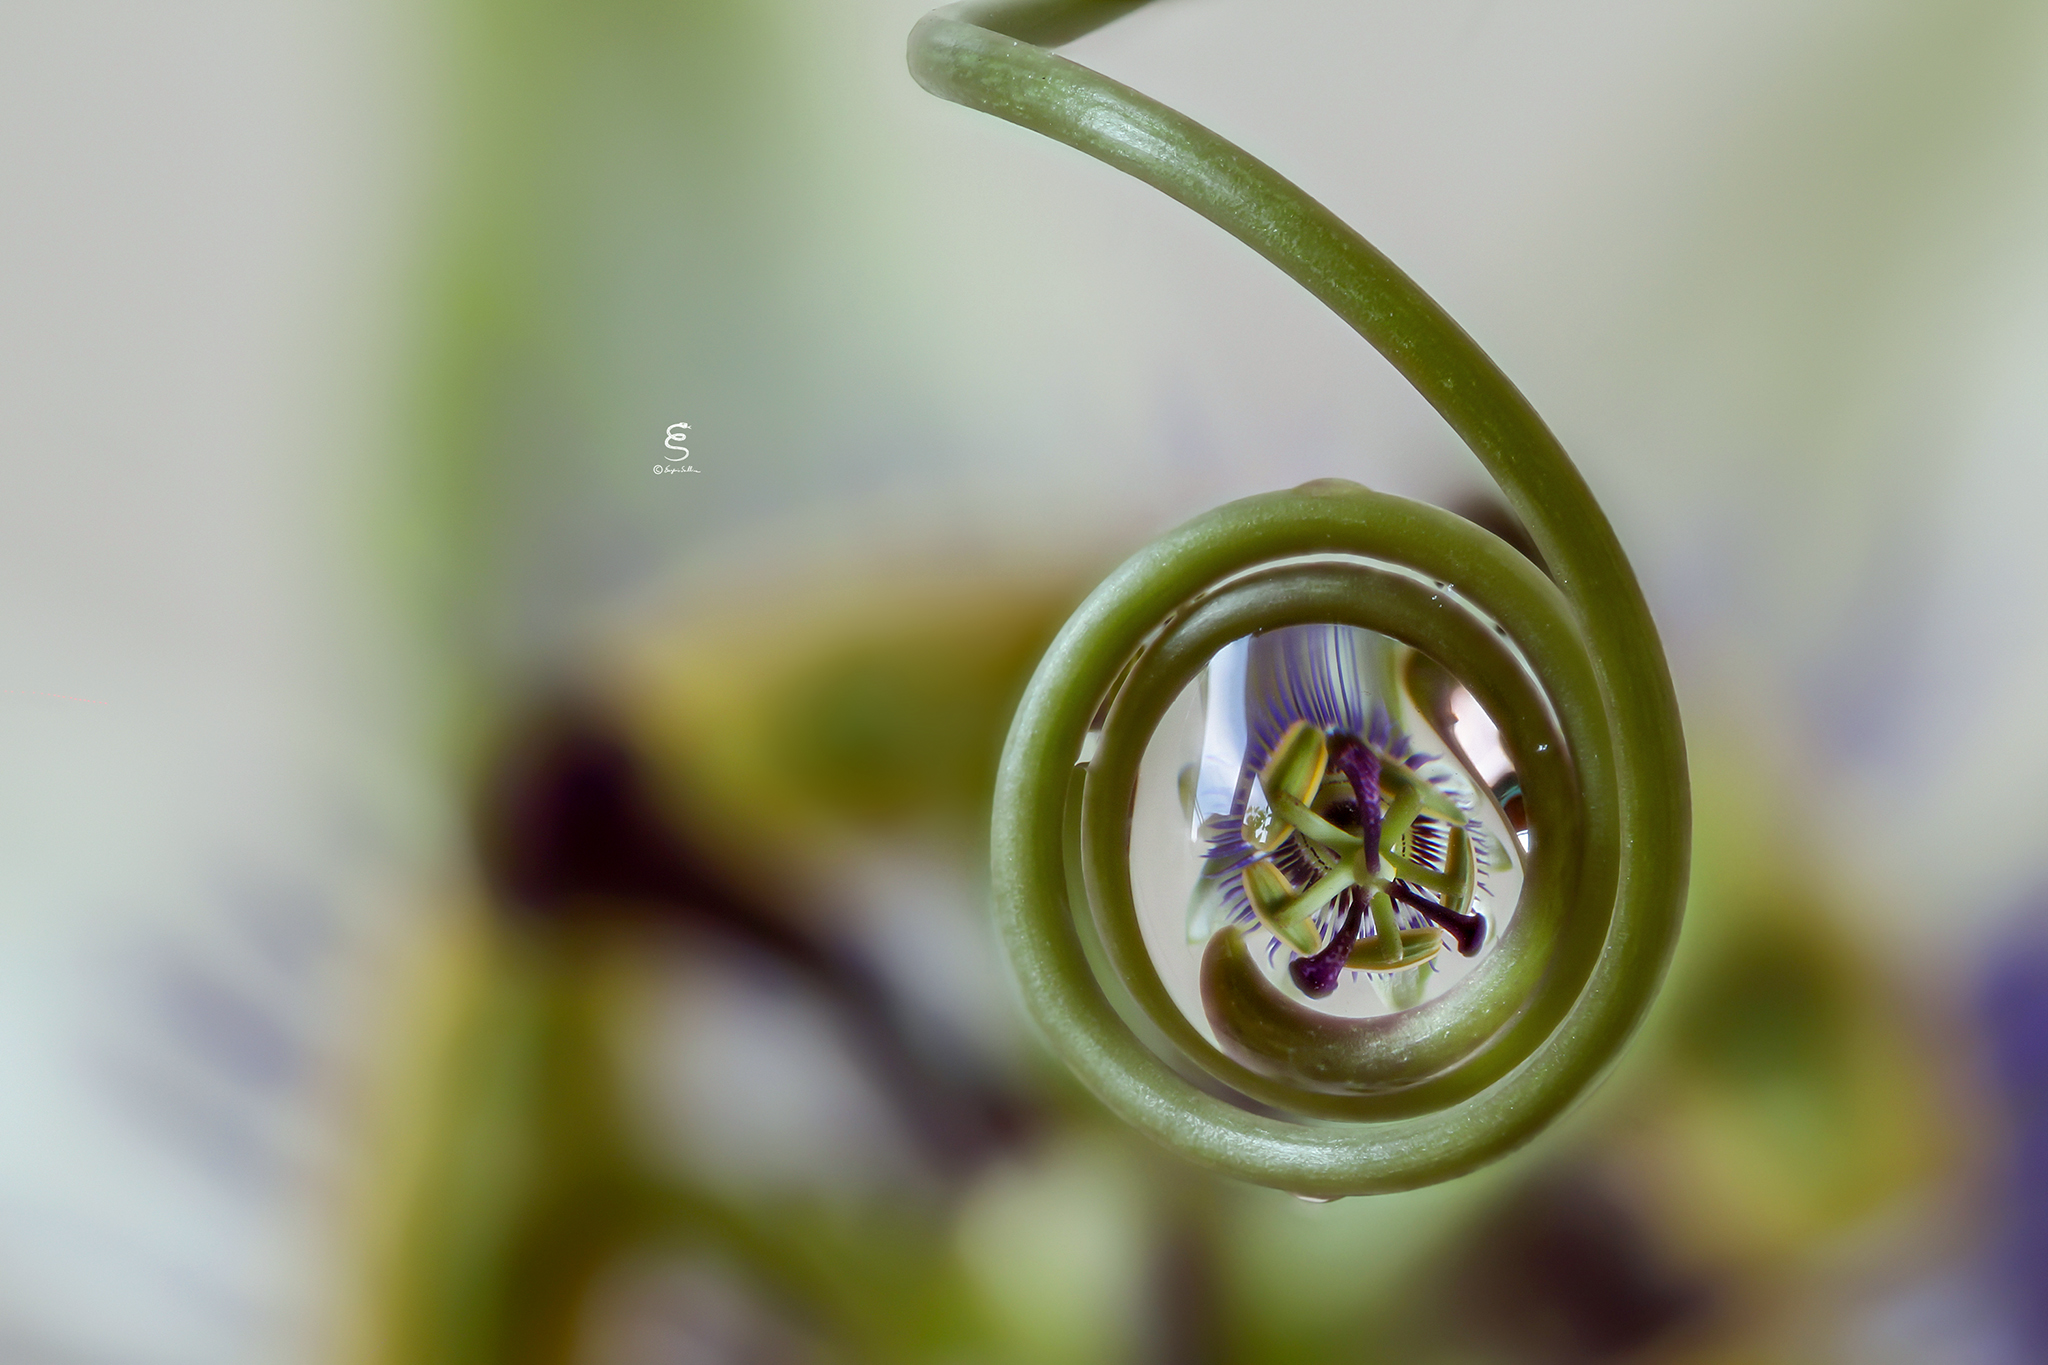 Passiflora reflected in his own vine...